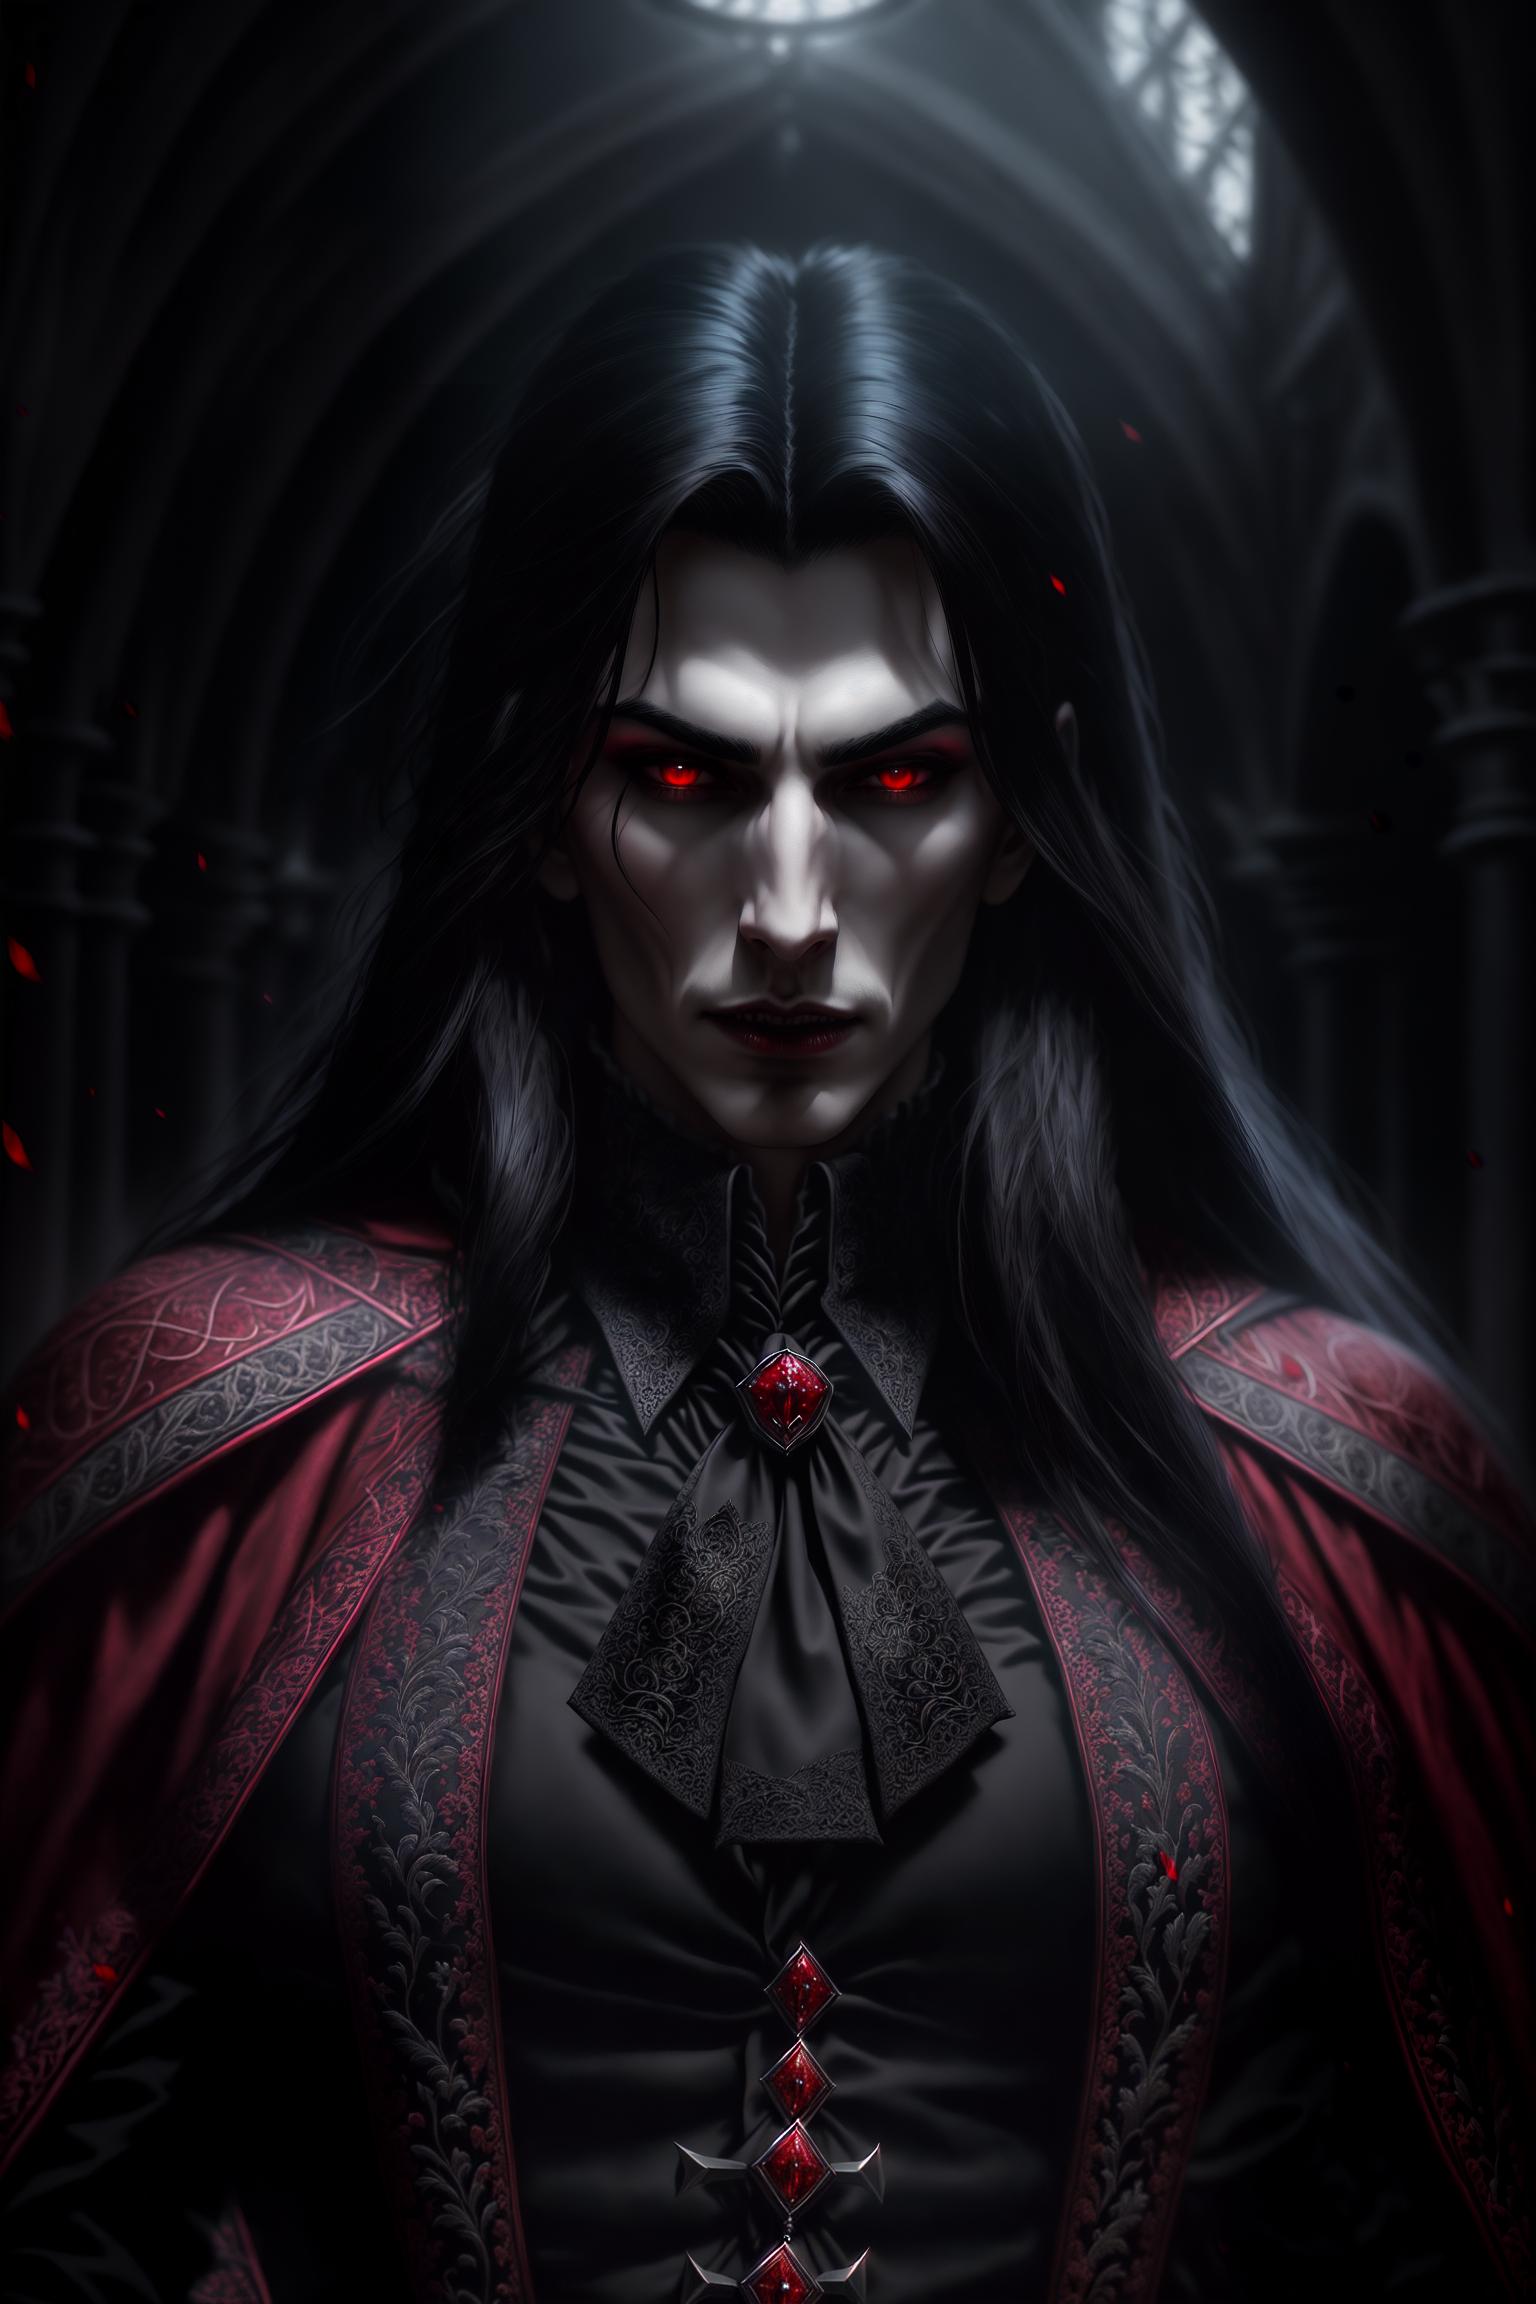  Dracula, (vampire characteristics:1.2), (pale and mysterious), (eyes may be red or dark black), (sharp fangs), (noble attire:1.0), (as a noble vampire), (wearing elaborate medieval European style clothing), (robes), (waistcoats), (high boots), (long hair and sharp claws:1.0), (possessing black long hair), (sharp and elongated fingernails to enhance his sinister image), (bloodstains:0.8), (fresh bloodstains at the corners of the mouth or on the chin to enhance his bloodthirsty nature), (dark castle:1.2), (main scene is a dark and solemn castle), (filled with Gothic architectural elements), (spires), (large windows), (intricate porch carvings), (nighttime setting:1.0), (story set at night), (using moonlight and starlight as the only light sou hyperrealistic, full body, detailed clothing, highly detailed, cinematic lighting, stunningly beautiful, intricate, sharp focus, f/1. 8, 85mm, (centered image composition), (professionally color graded), ((bright soft diffused light)), volumetric fog, trending on instagram, trending on tumblr, HDR 4K, 8K